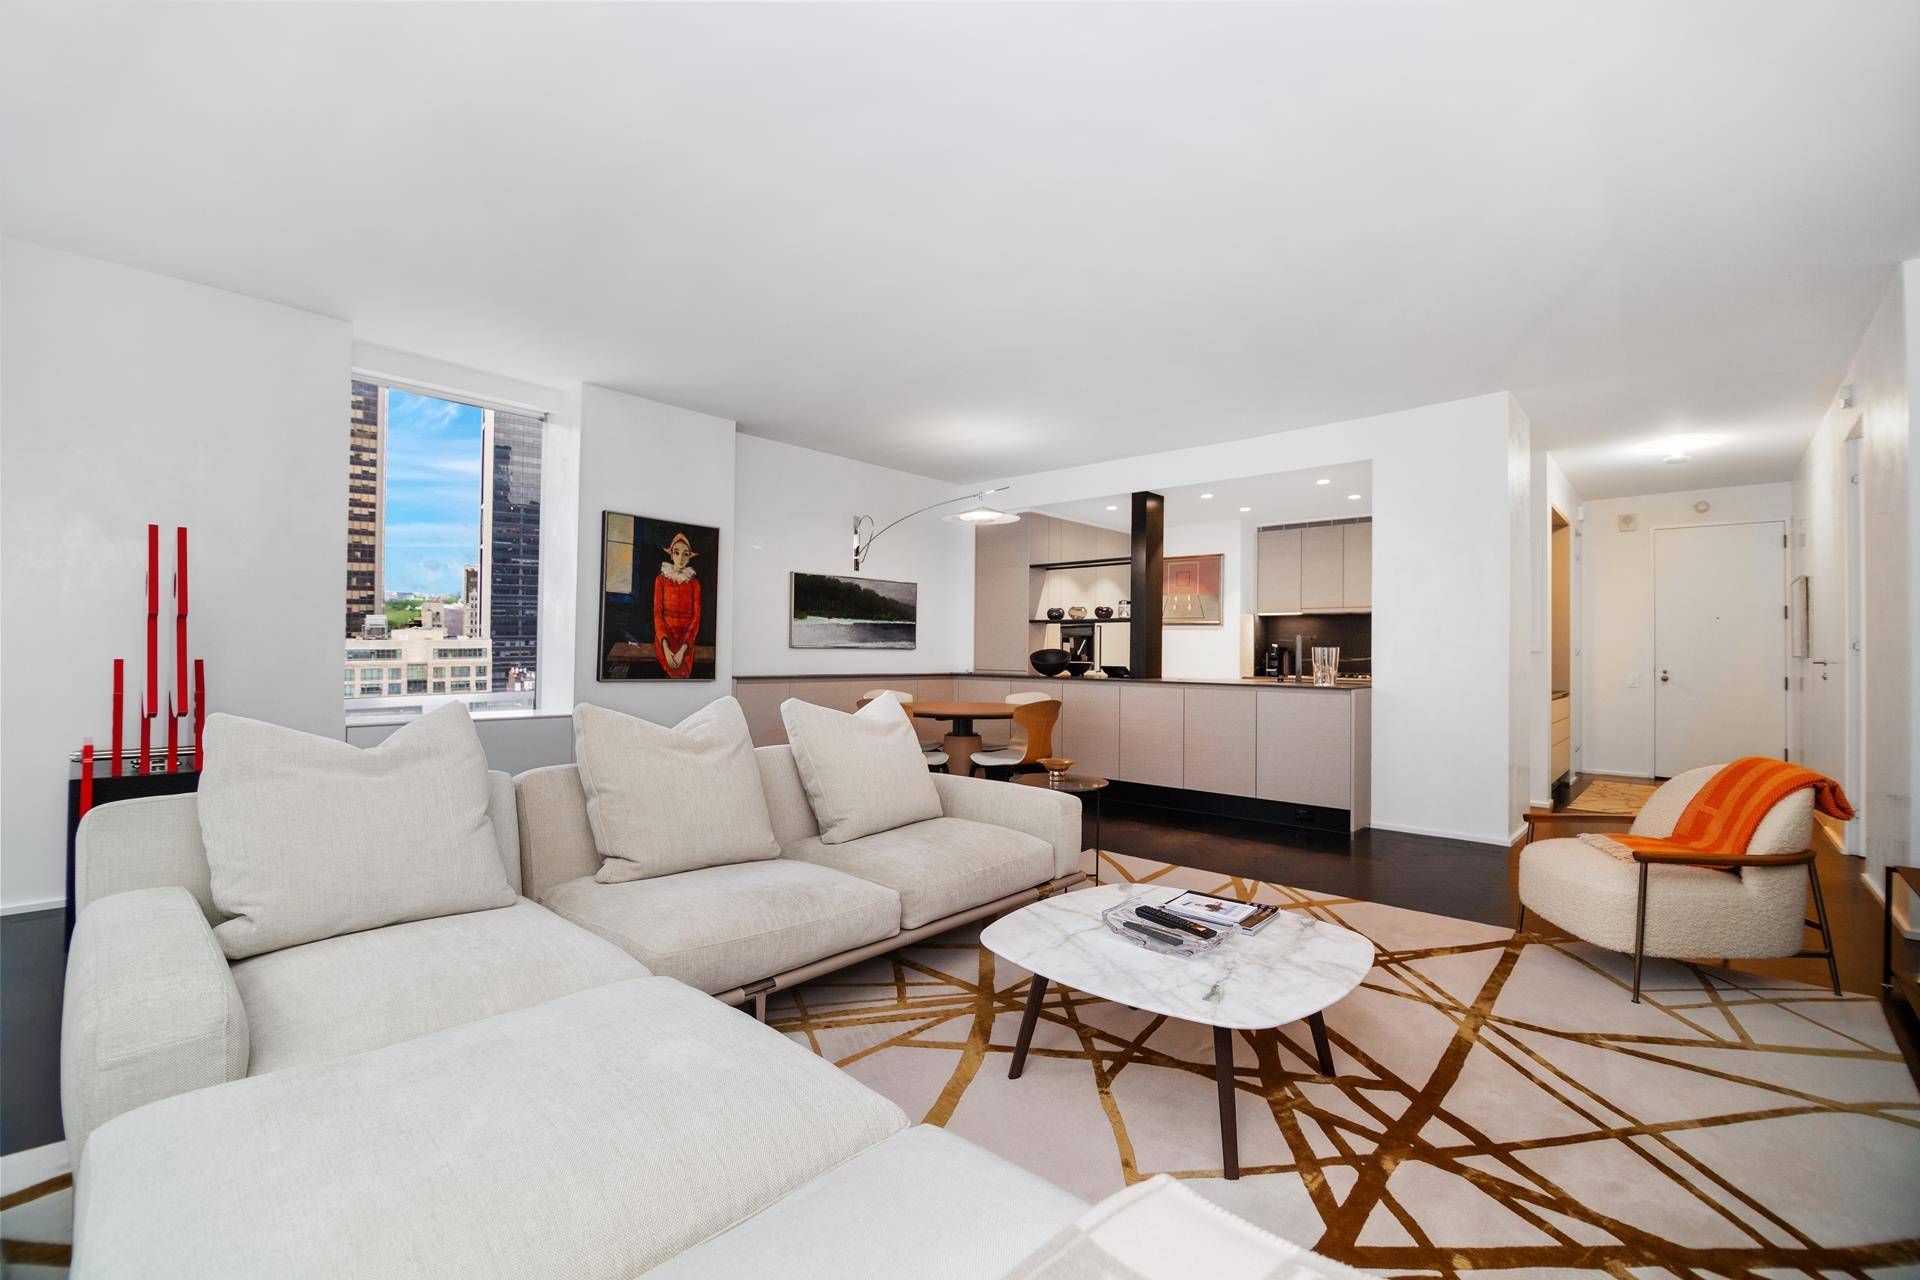 PRISTINE HOME IN MUSEUM TOWERThis newly renovated spacious one bedroom condominium is a rare find in Museum Tower next to the Museum of Modern Art on West 53rd Street in ...